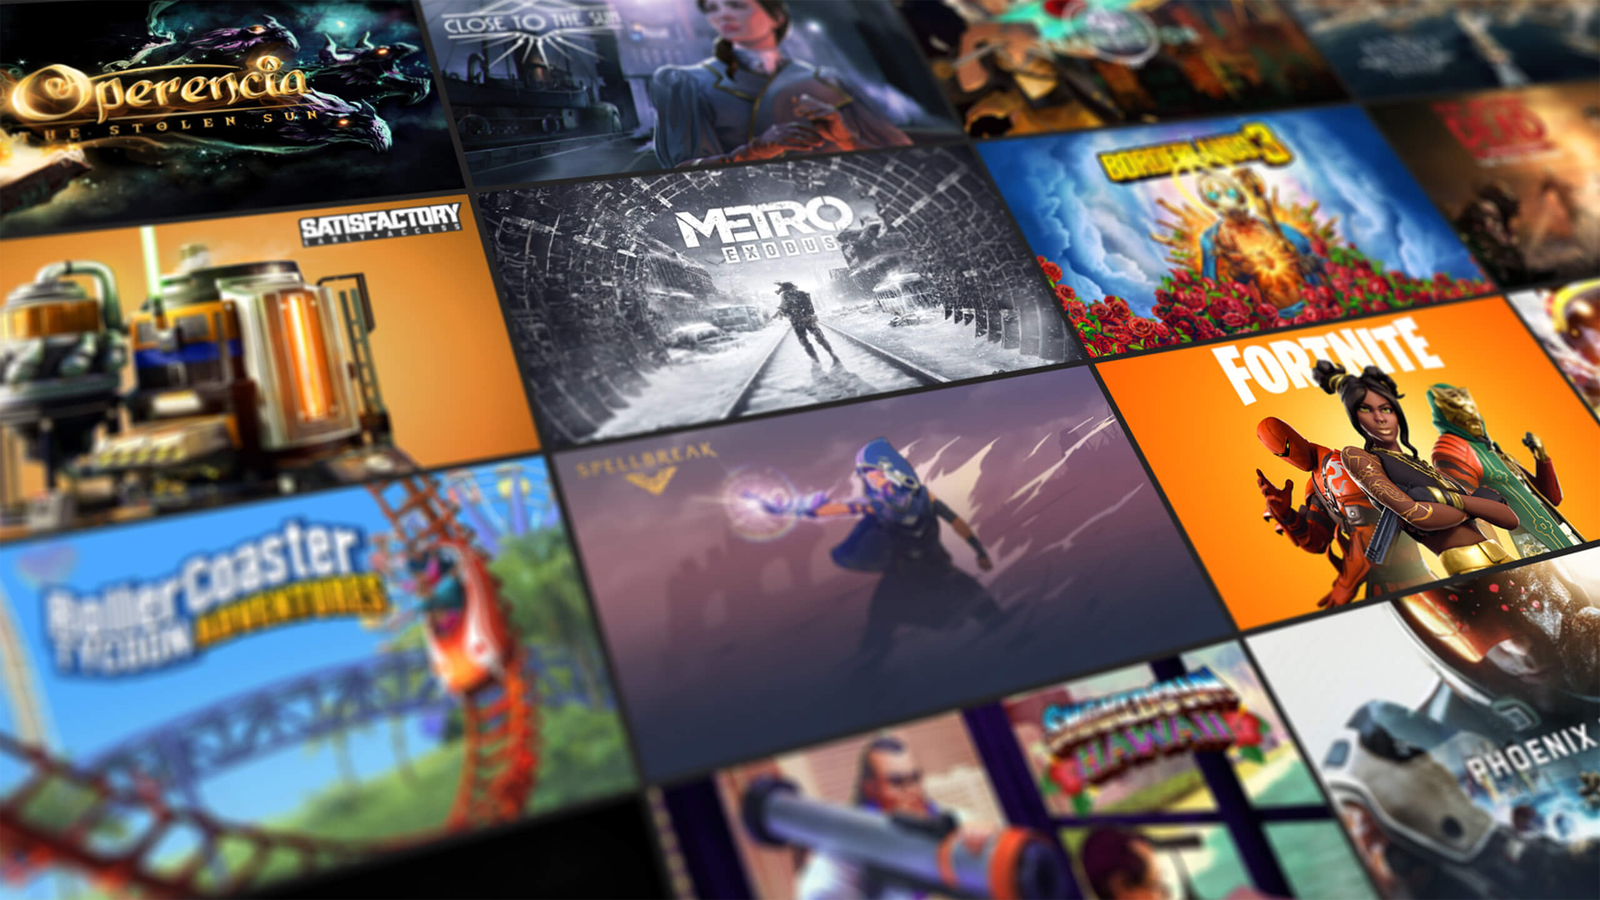 Epic Games Store chief says they'll eventually stop paying for exclusive PC  games - The Verge